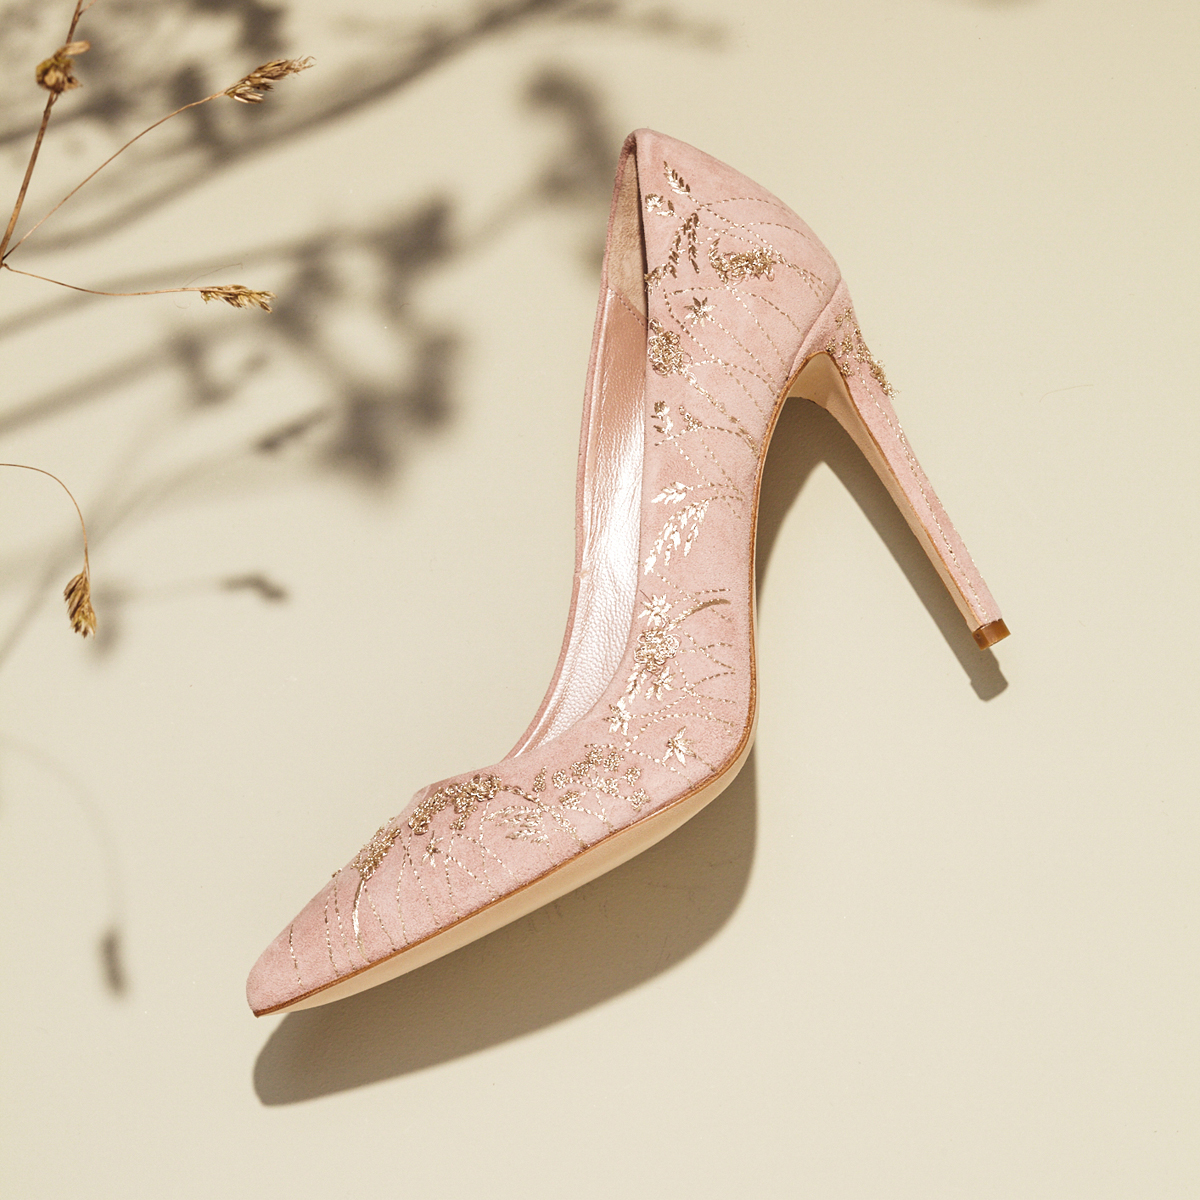 Pink suede wedding shoes, Emmy London.